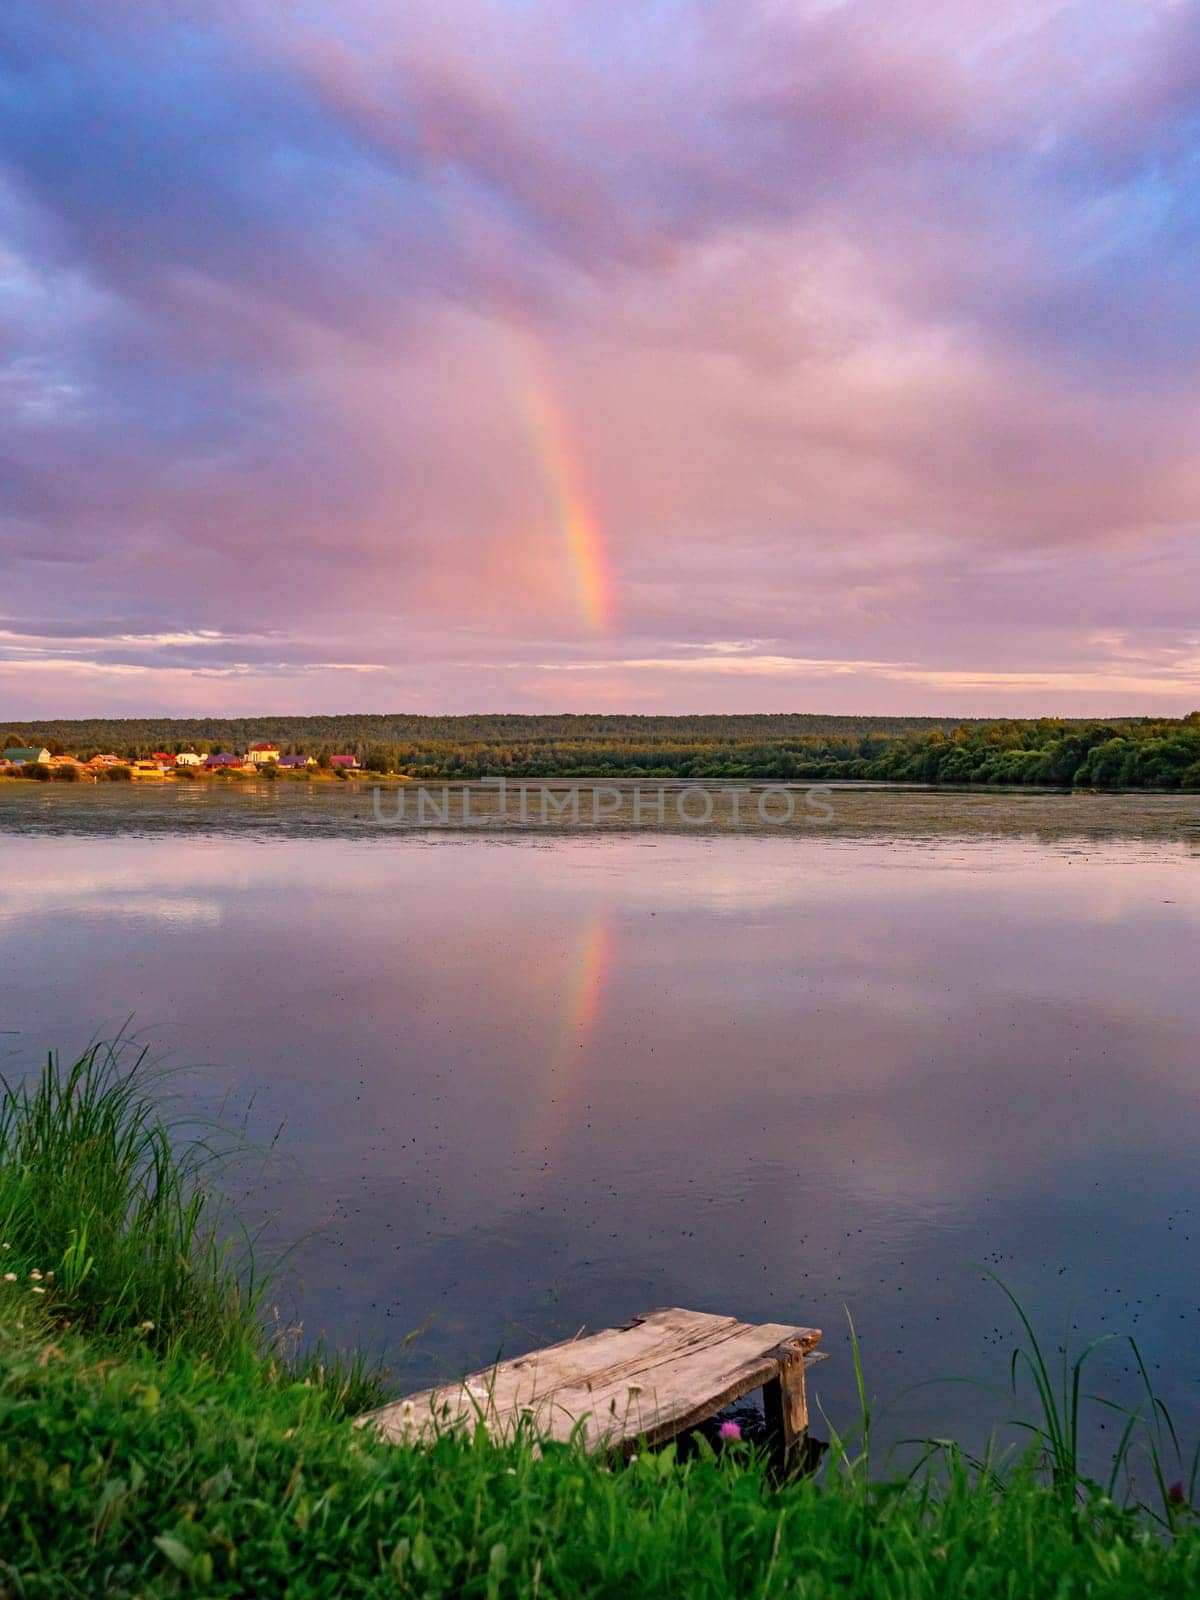 A serene countryside scene during sunset, showcasing a tranquil lake with a wooden dock in the foreground. A rainbow is reflected in the water, surrounded by a soft pink and purple sky.